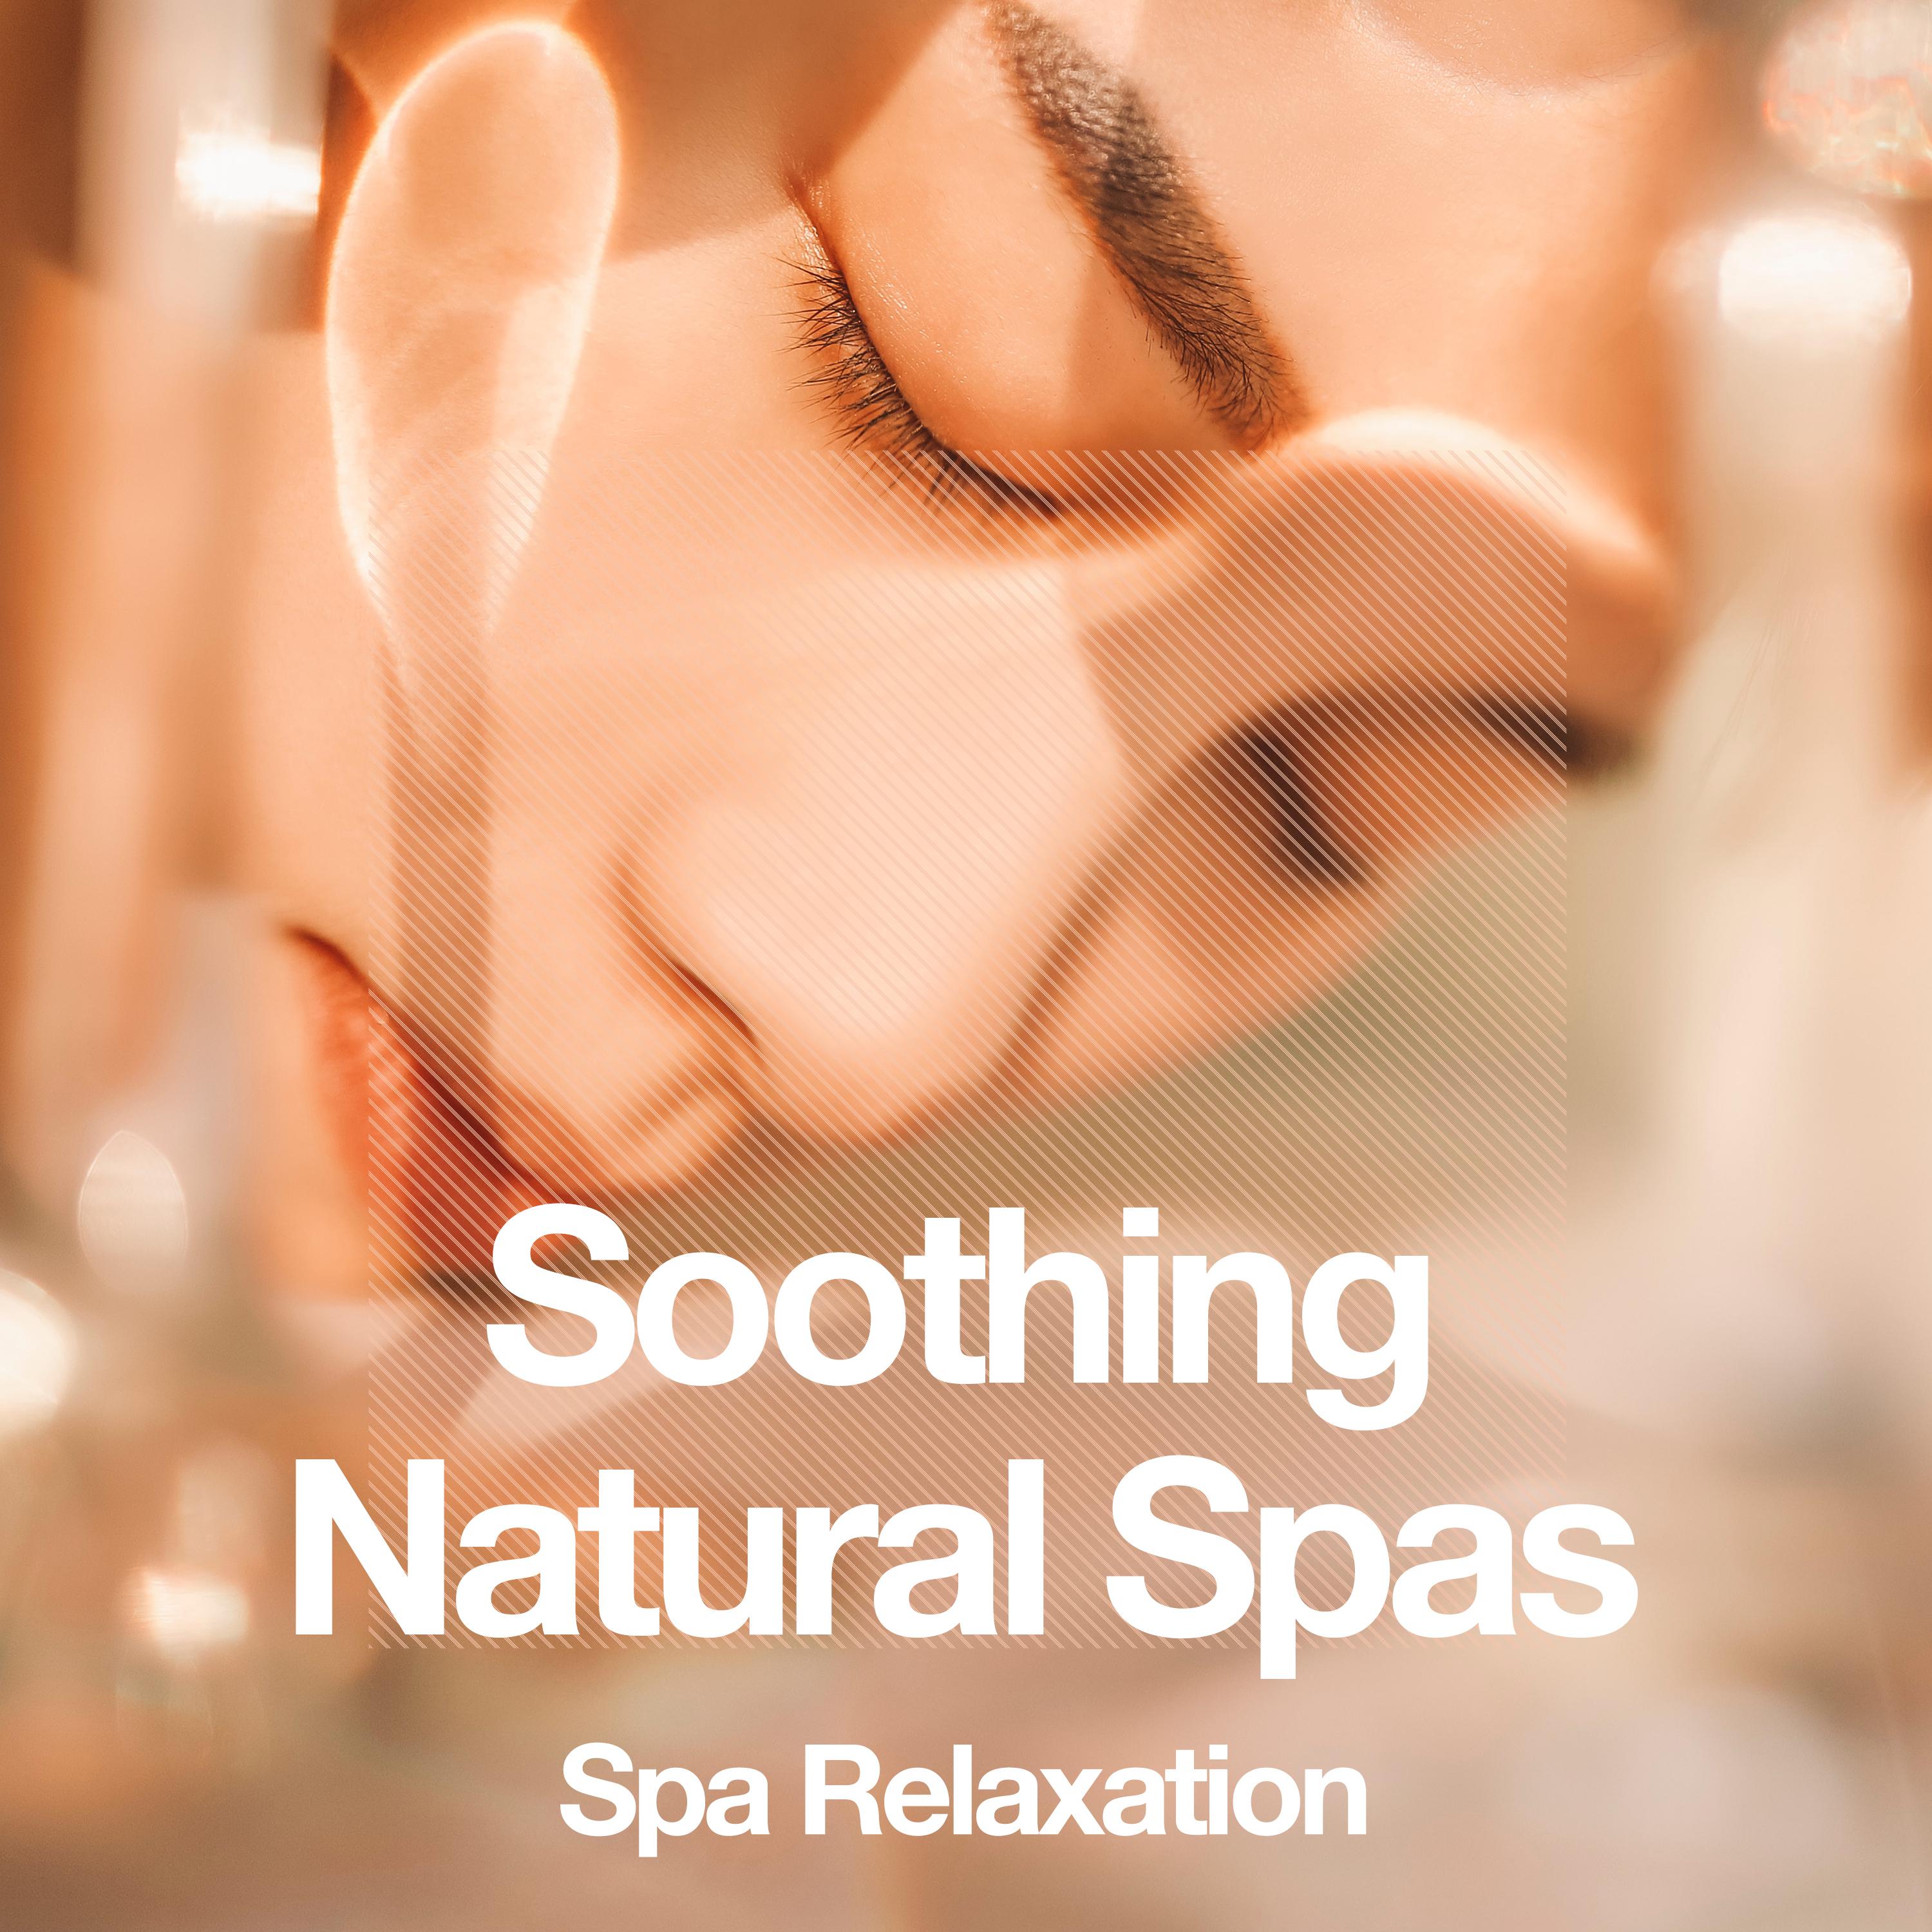 Soothing Natural Spas